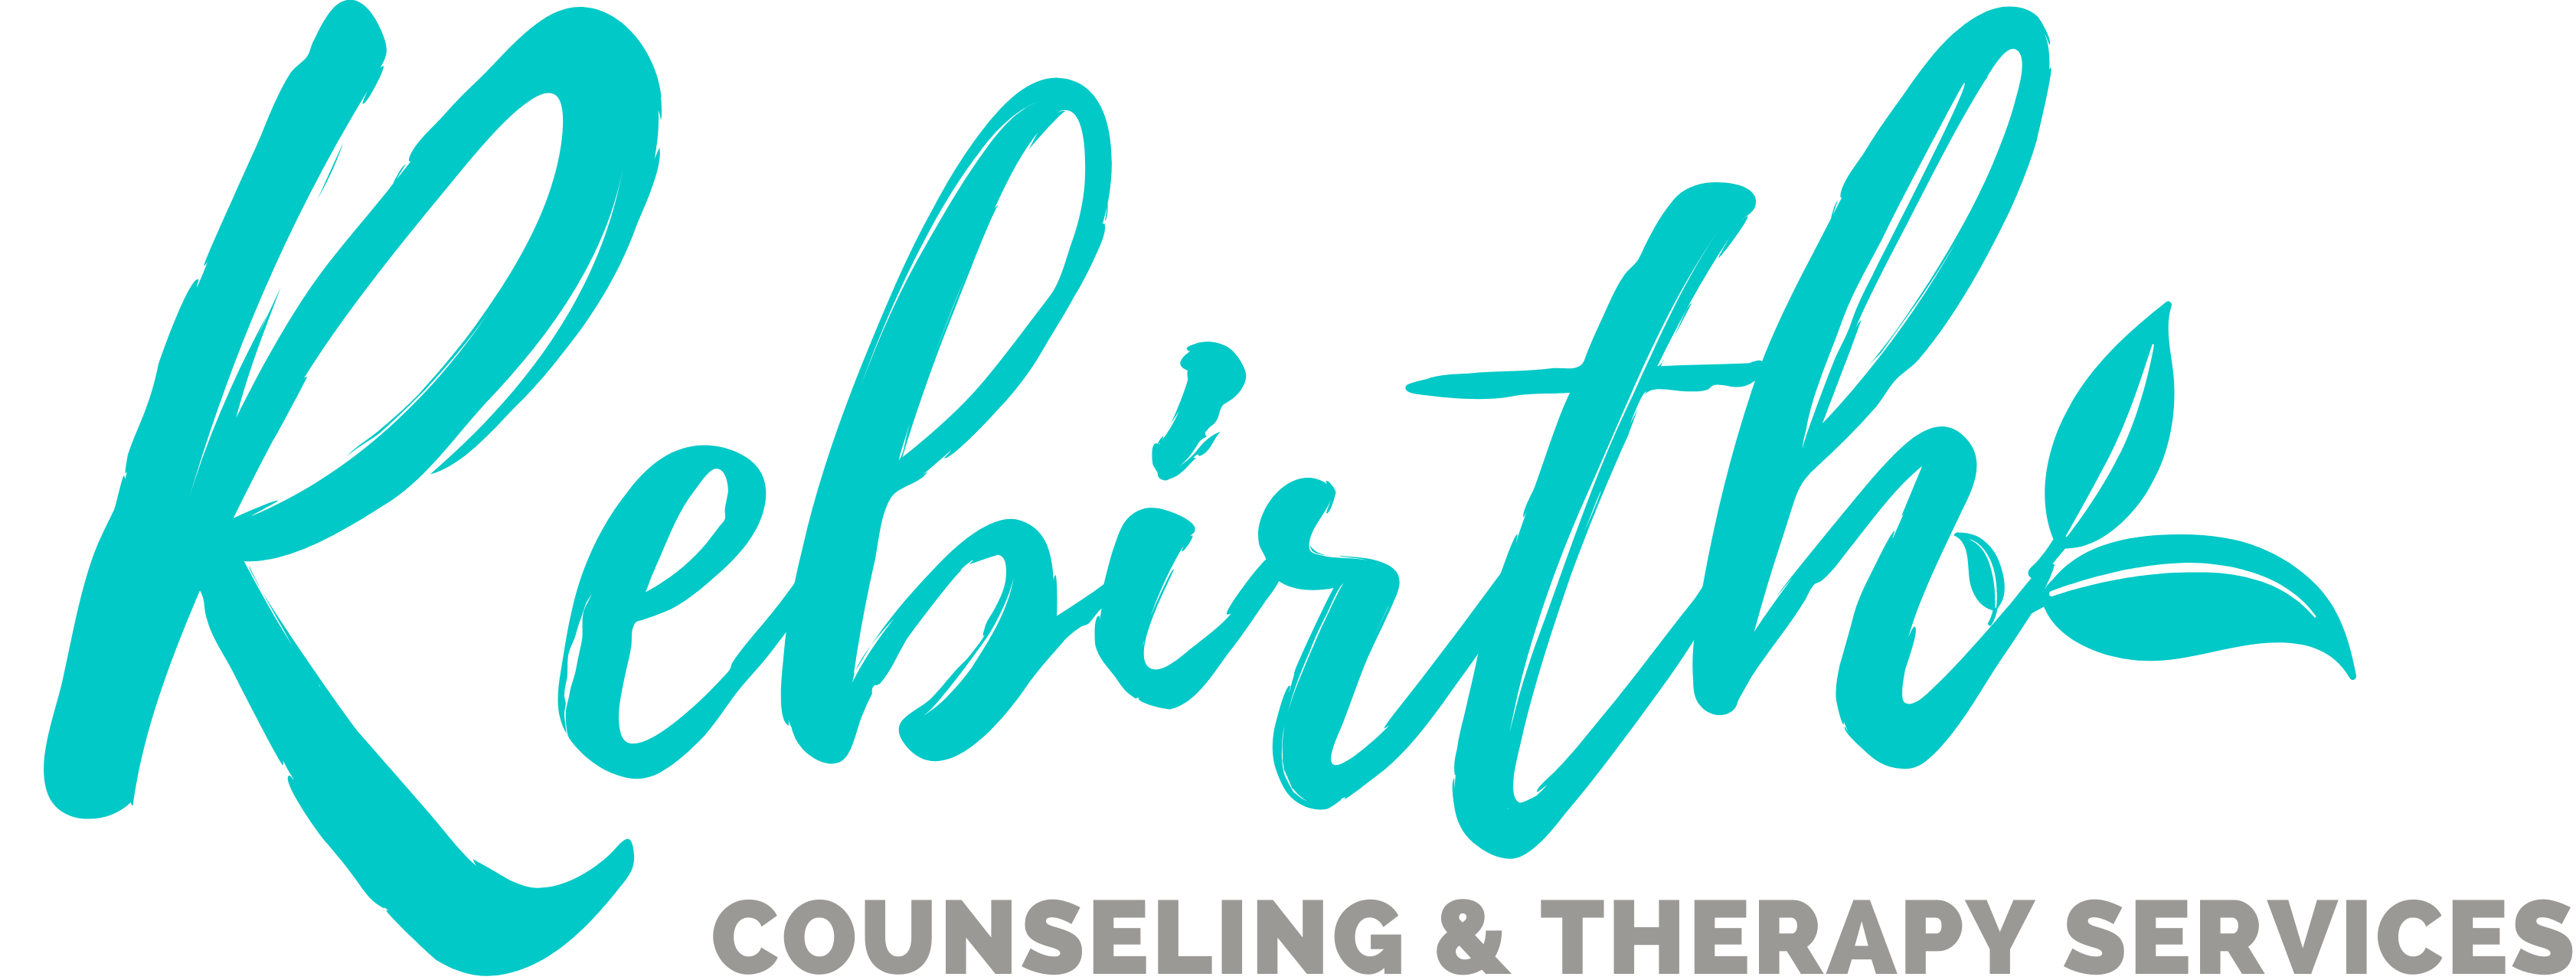 Rebirth Counseling & Therapy Services logo